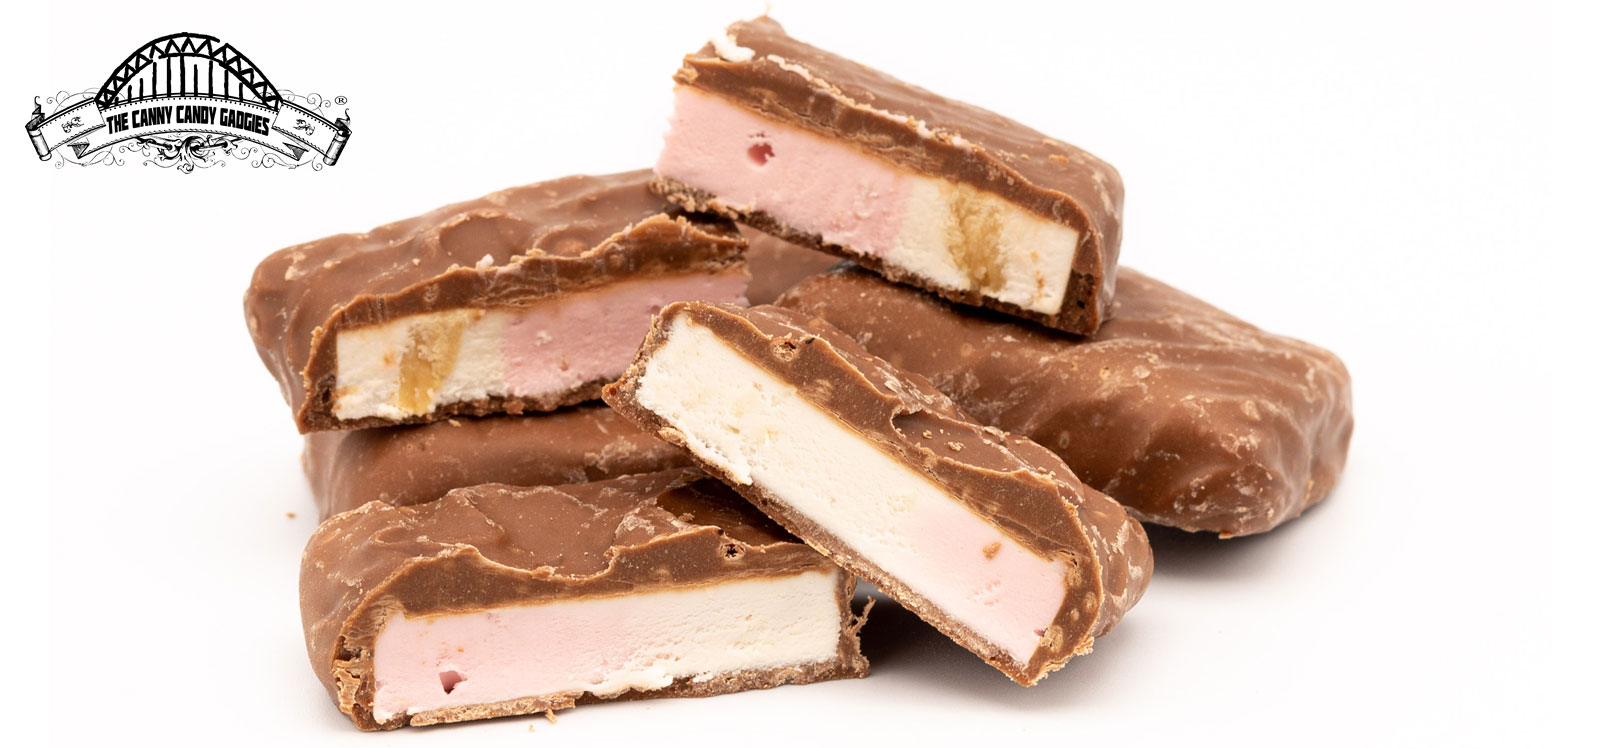 Nougat at The Canny Candy Gadgies